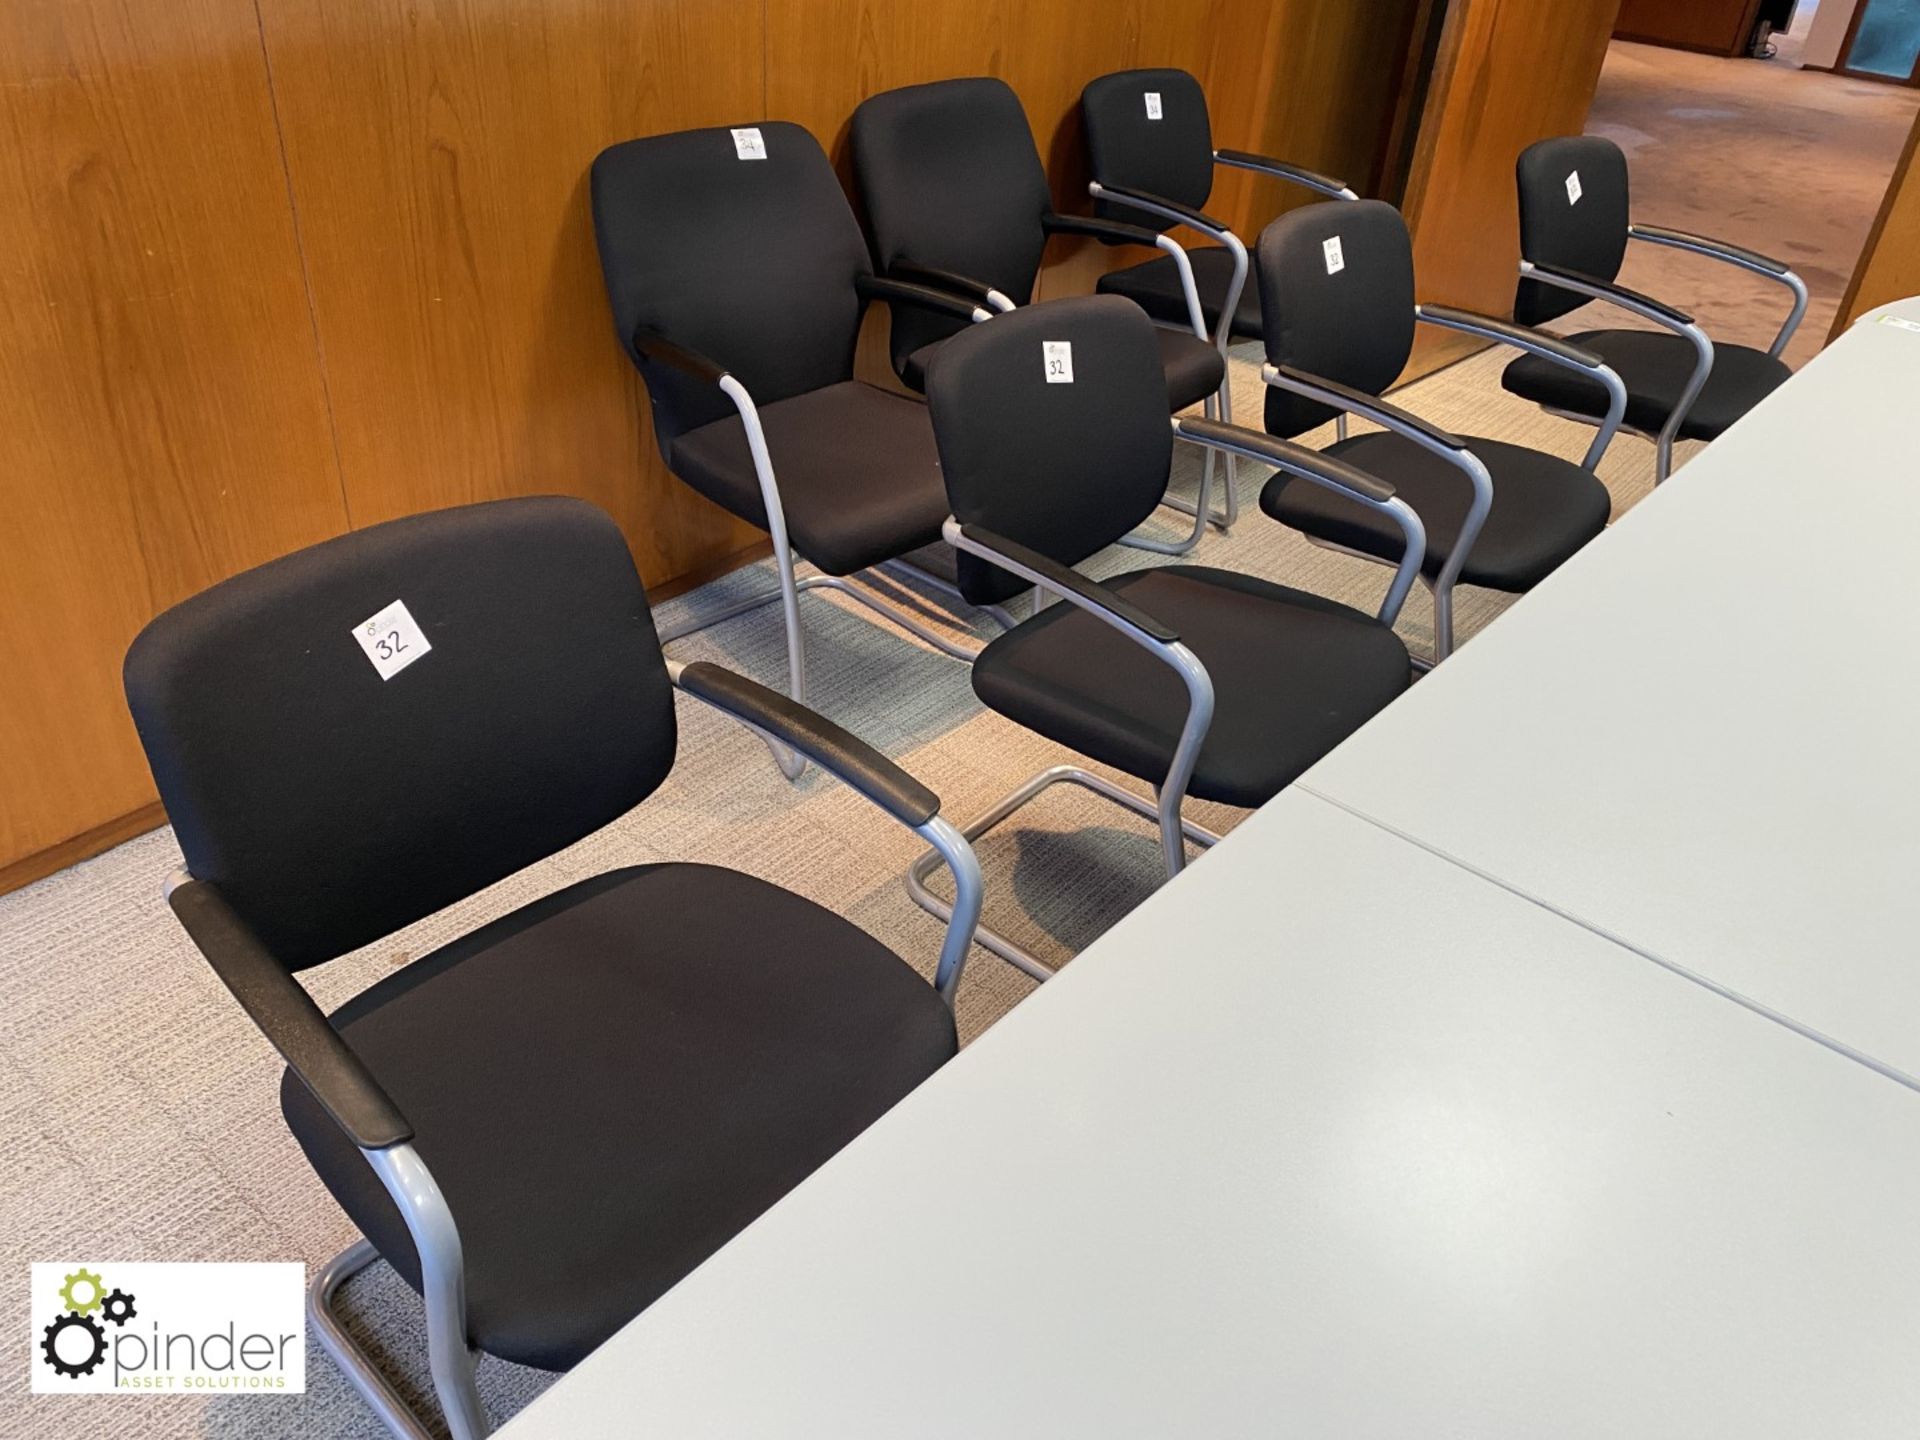 Set 4 upholstered cantilever Meeting Chairs, black (located in Meeting Room 9 on 23rd Floor) - Image 3 of 3